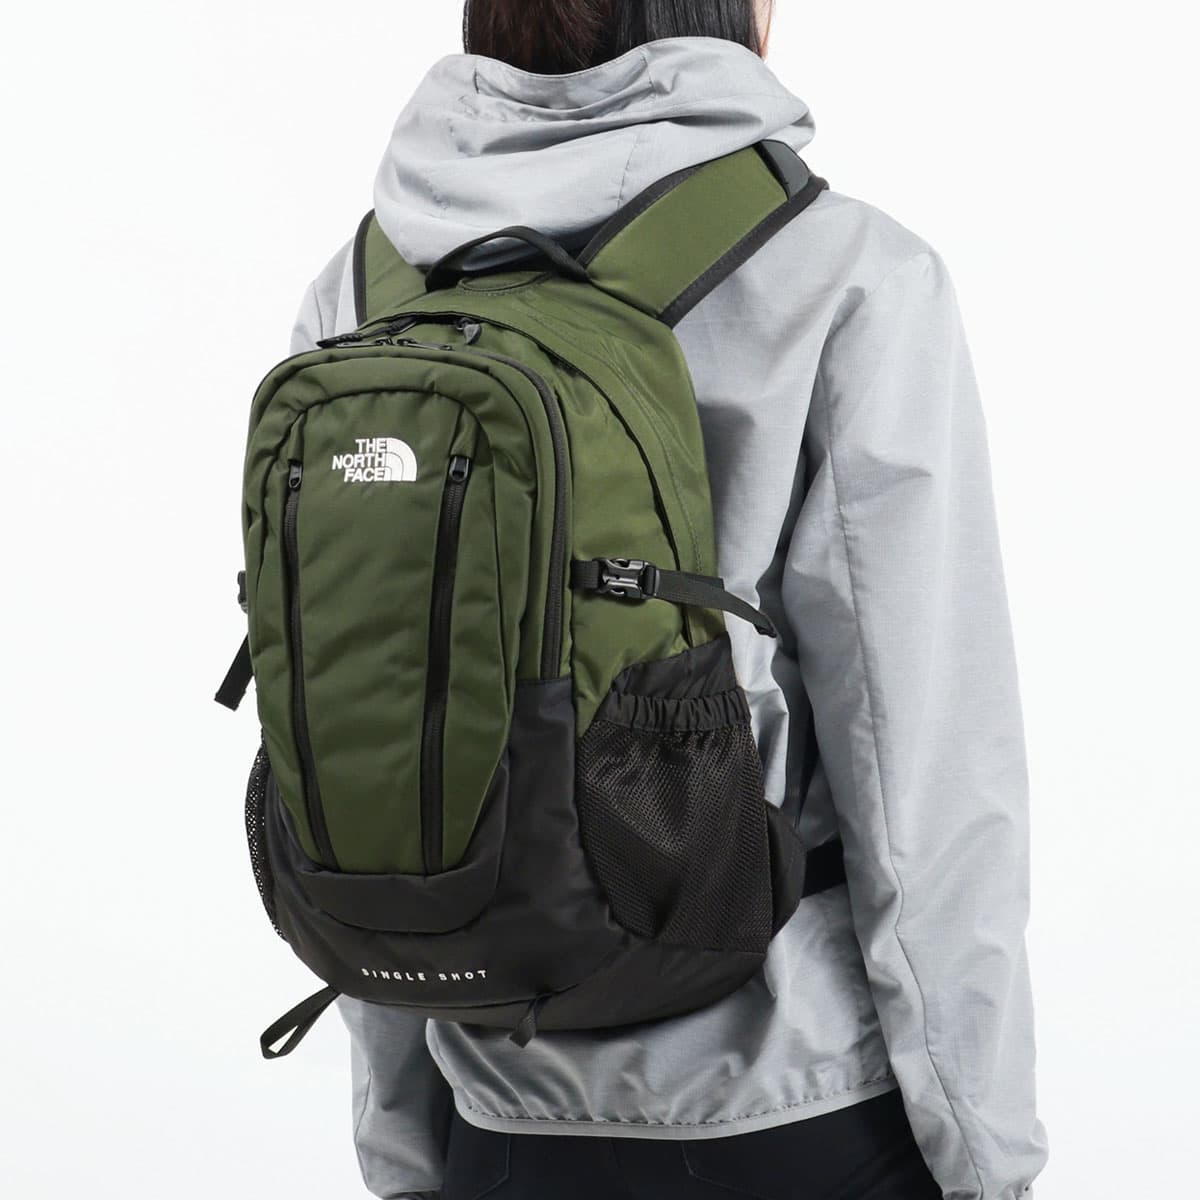 The North face single shot リュック　バックパック